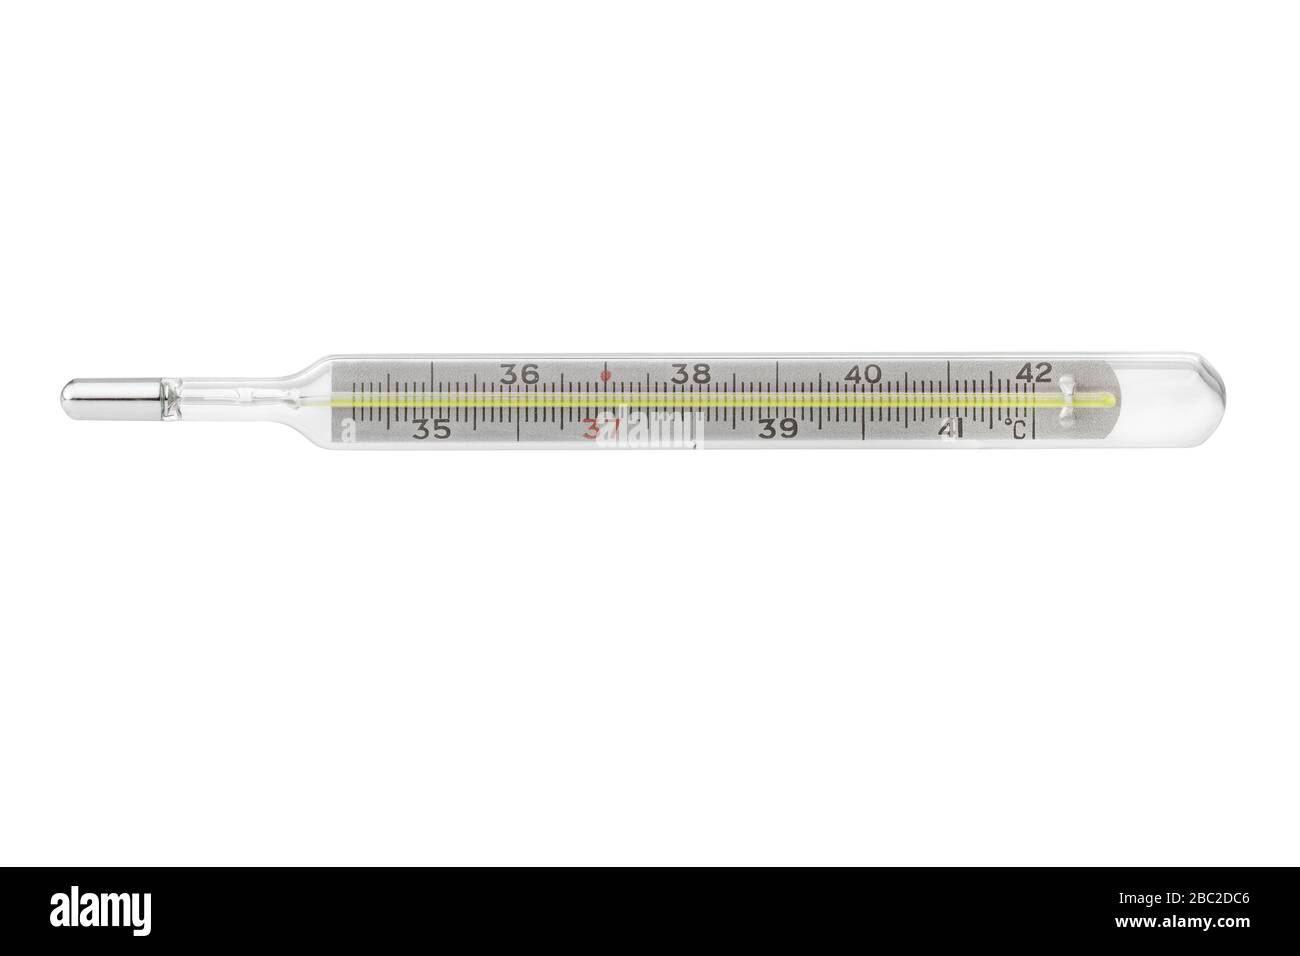 https://c8.alamy.com/comp/2BC2DC6/a-mercury-thermometer-with-an-elevated-temperature-of-thirty-seven-degrees-celsius-2BC2DC6.jpg